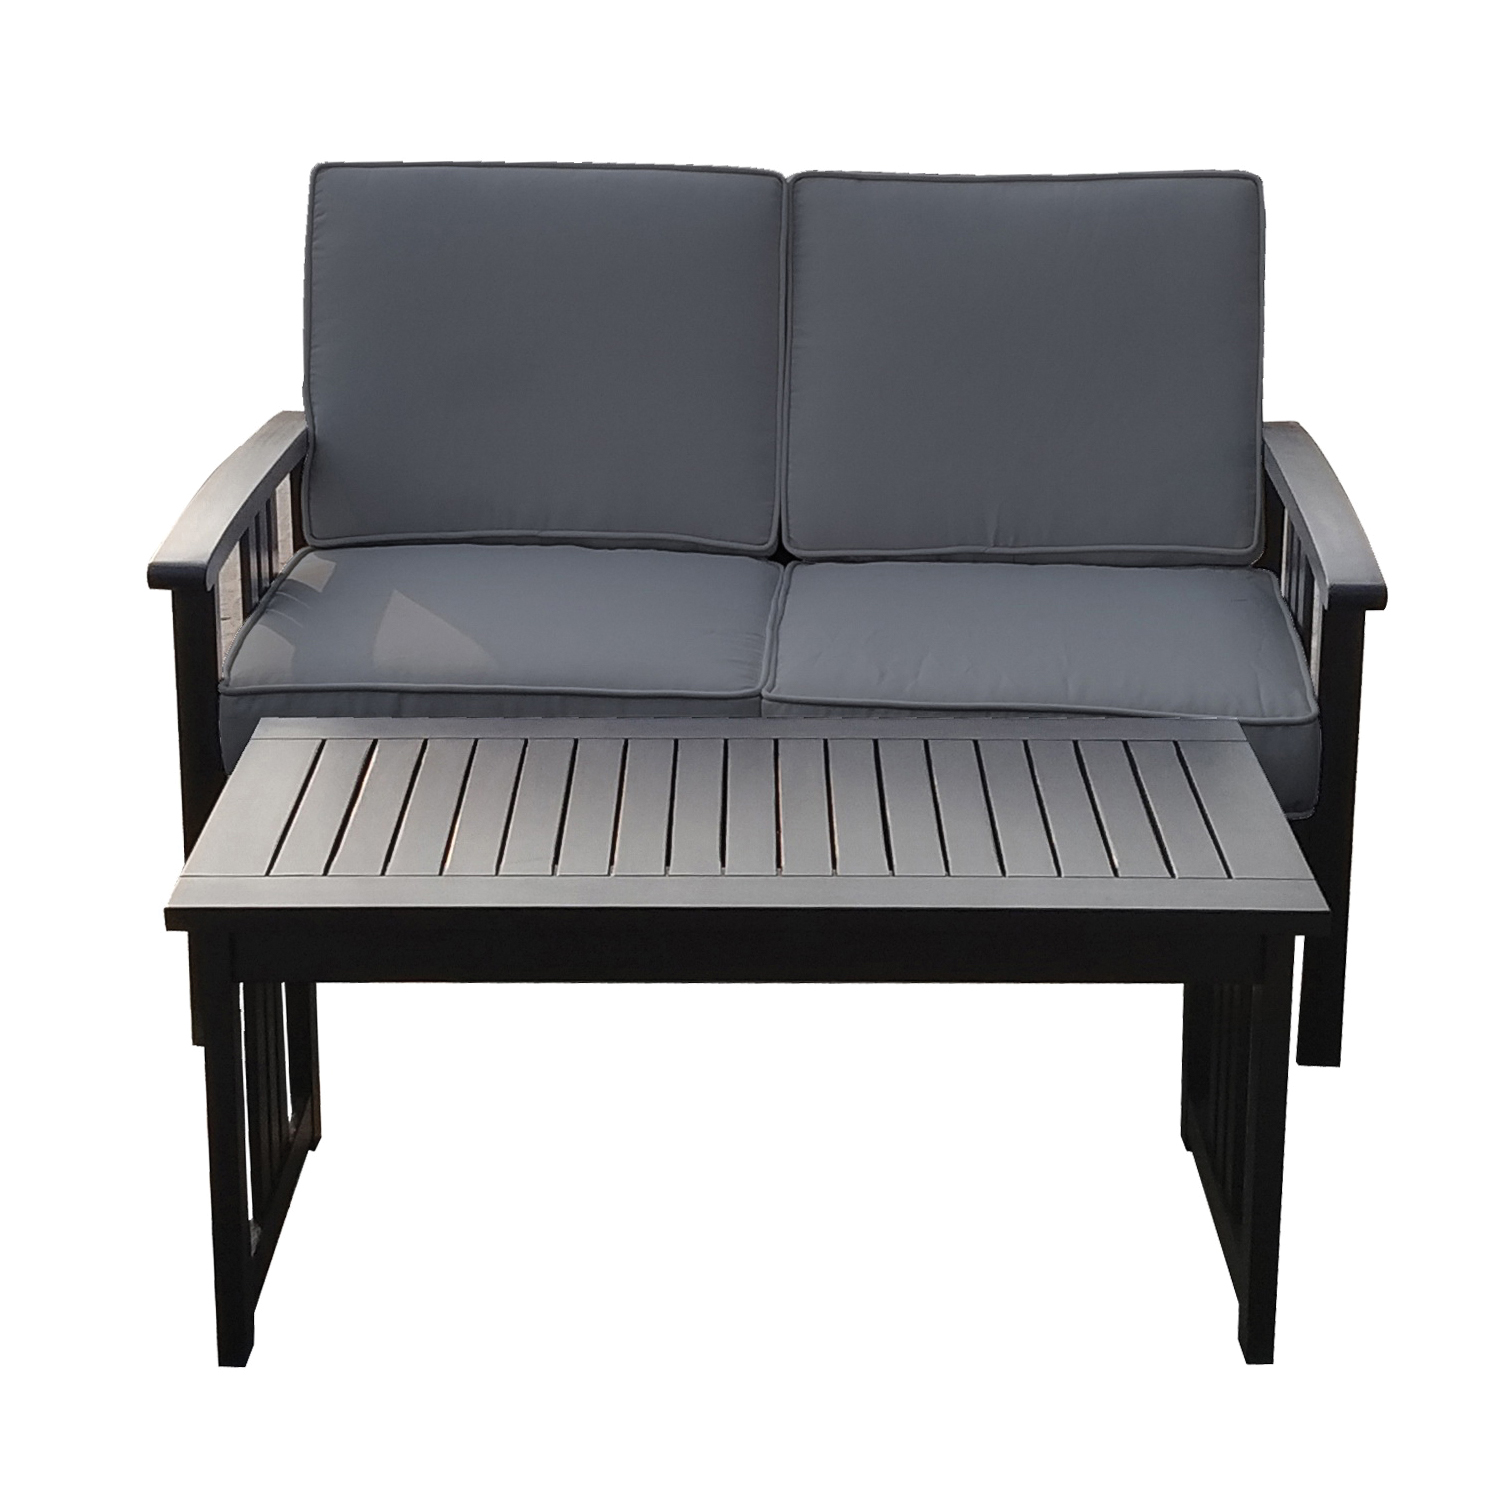 IP102-170LST Patio Furniture Deep Loveseat Table, Fabric/Wood, Black, Painted, 2-Piece